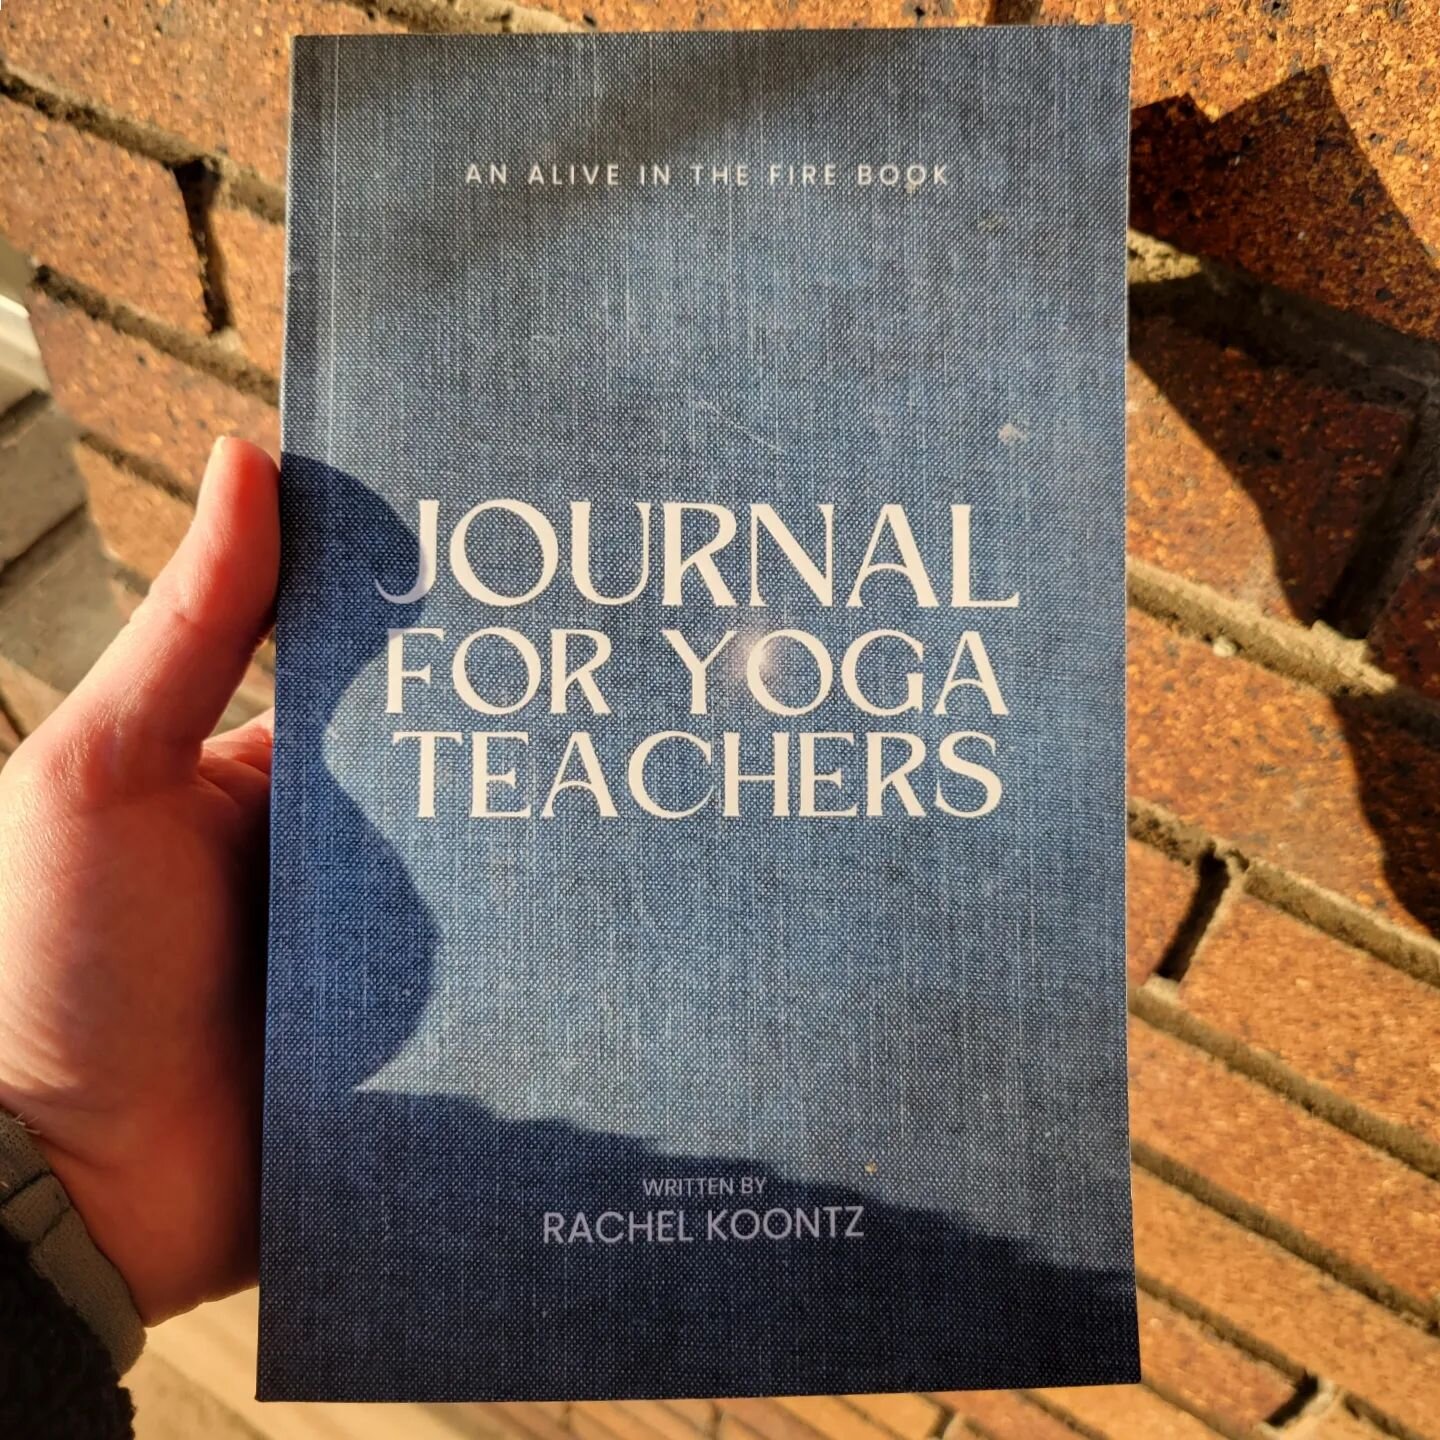 A JOURNAL FOR YOGA TEACHERS 🔥📚 New on my Amazon page! 

📓 This journal is filled with all the empowering words I wish I'd had for myself in my early days of teaching. 😊🙏 

Swipe ⬅️ to see 2 meditations on embracing nervousness and allowing yours